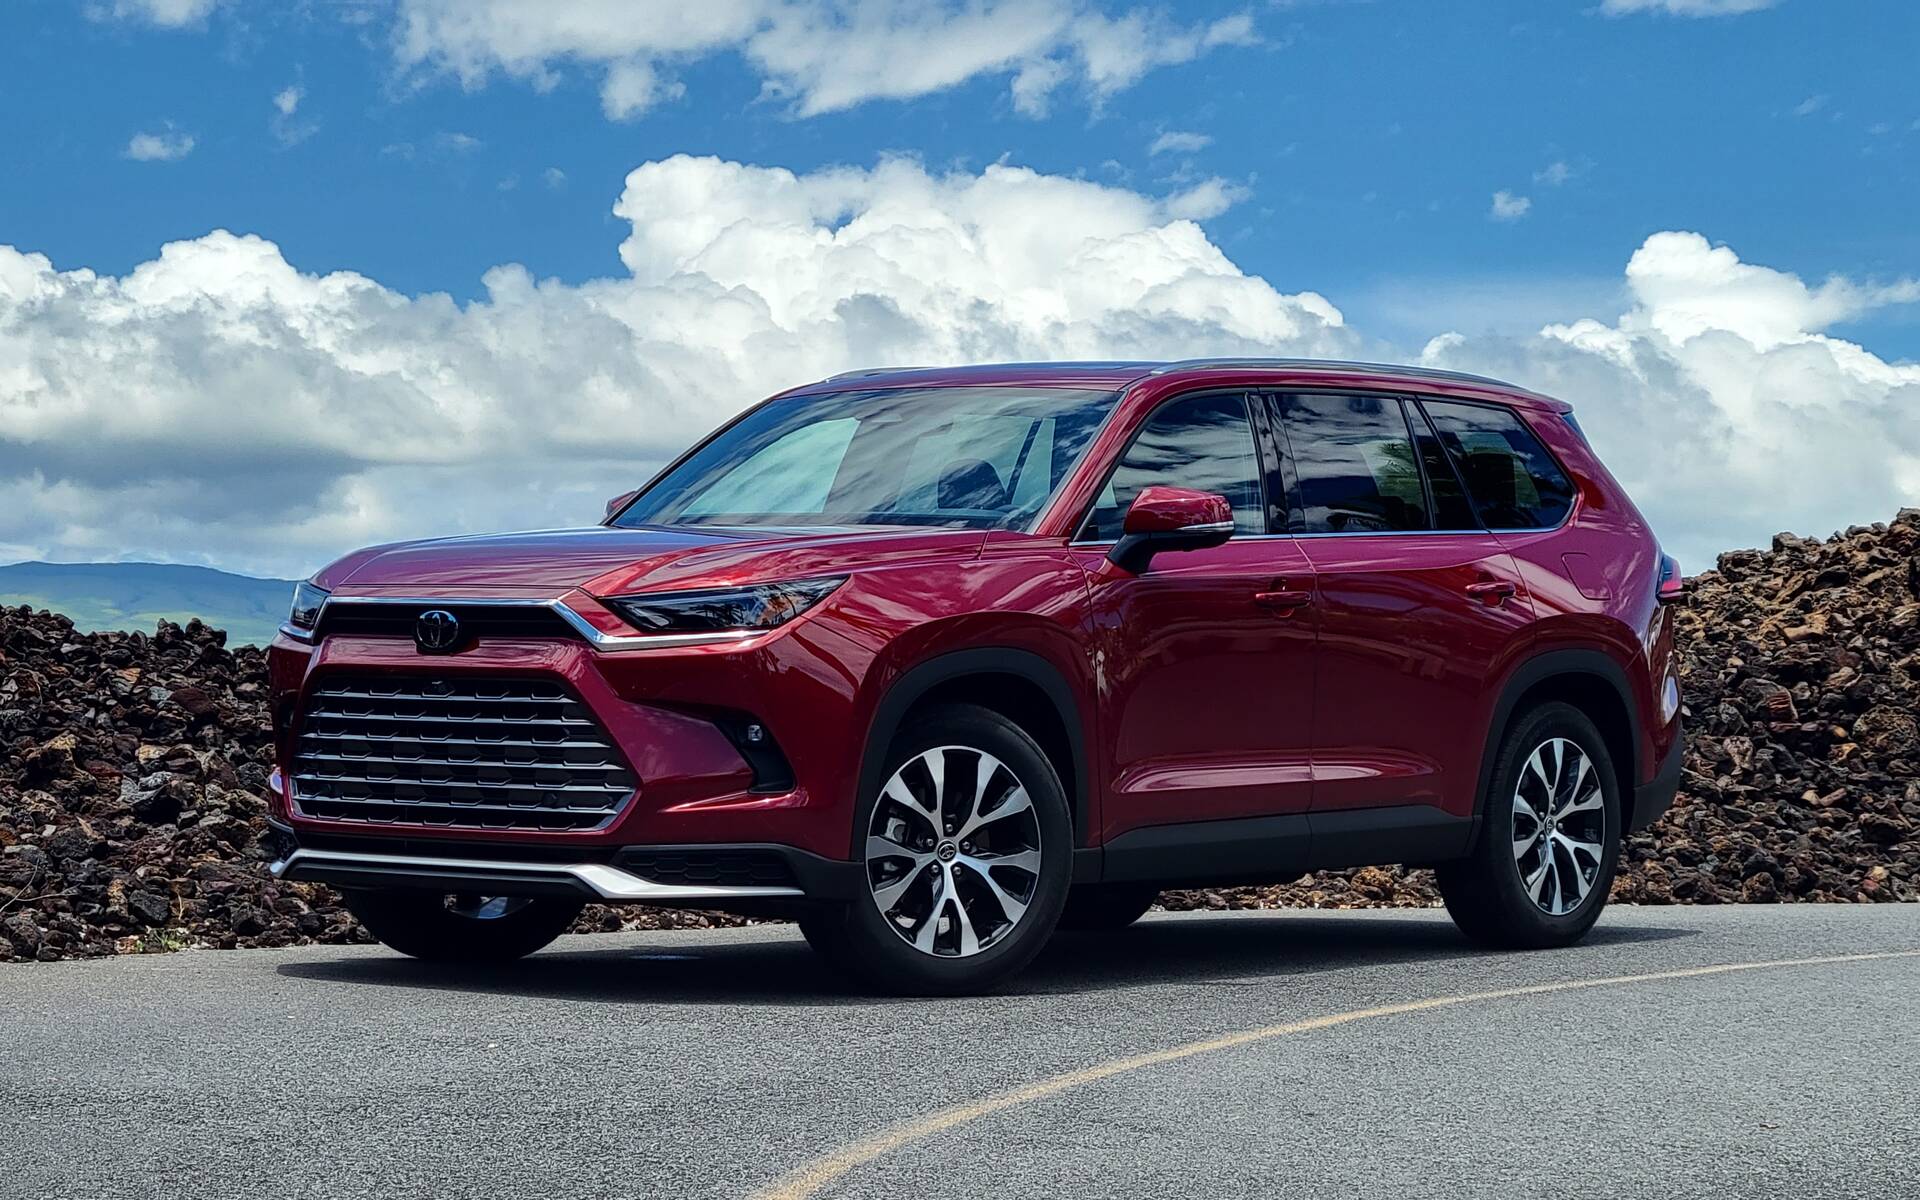 2023 Toyota Highlander Turbo First Drive Review: The Family Ride